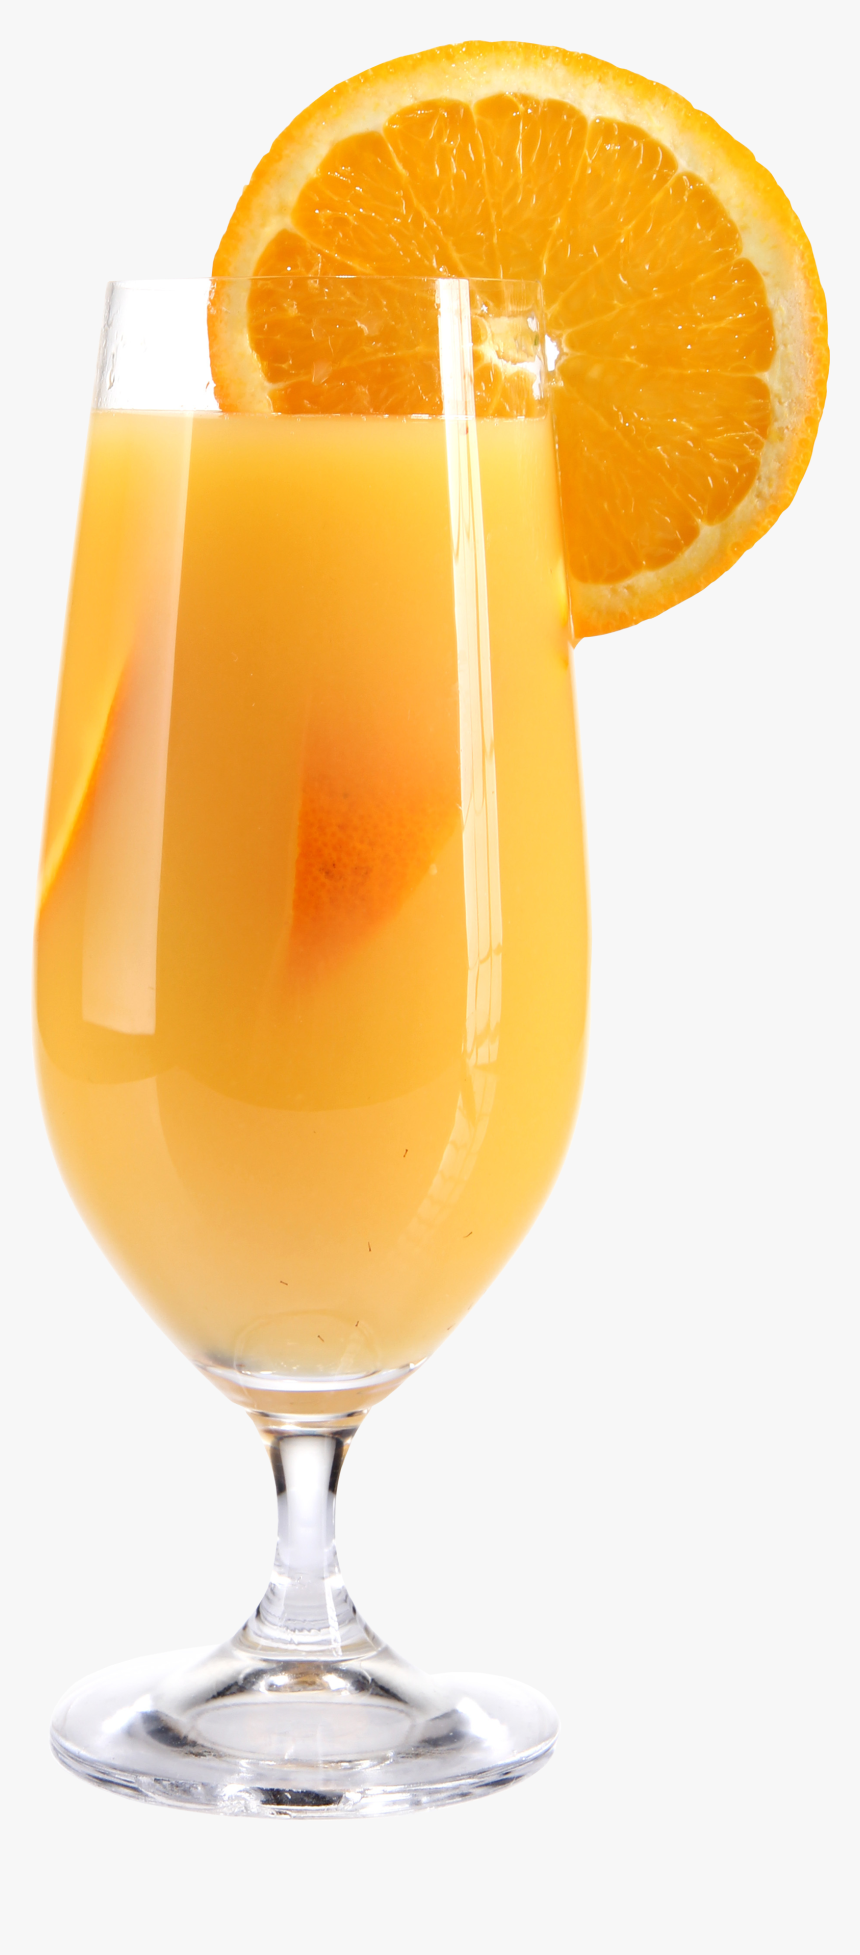 Wine Glass - Orange Juice In A Wine Glass, HD Png Download, Free Download